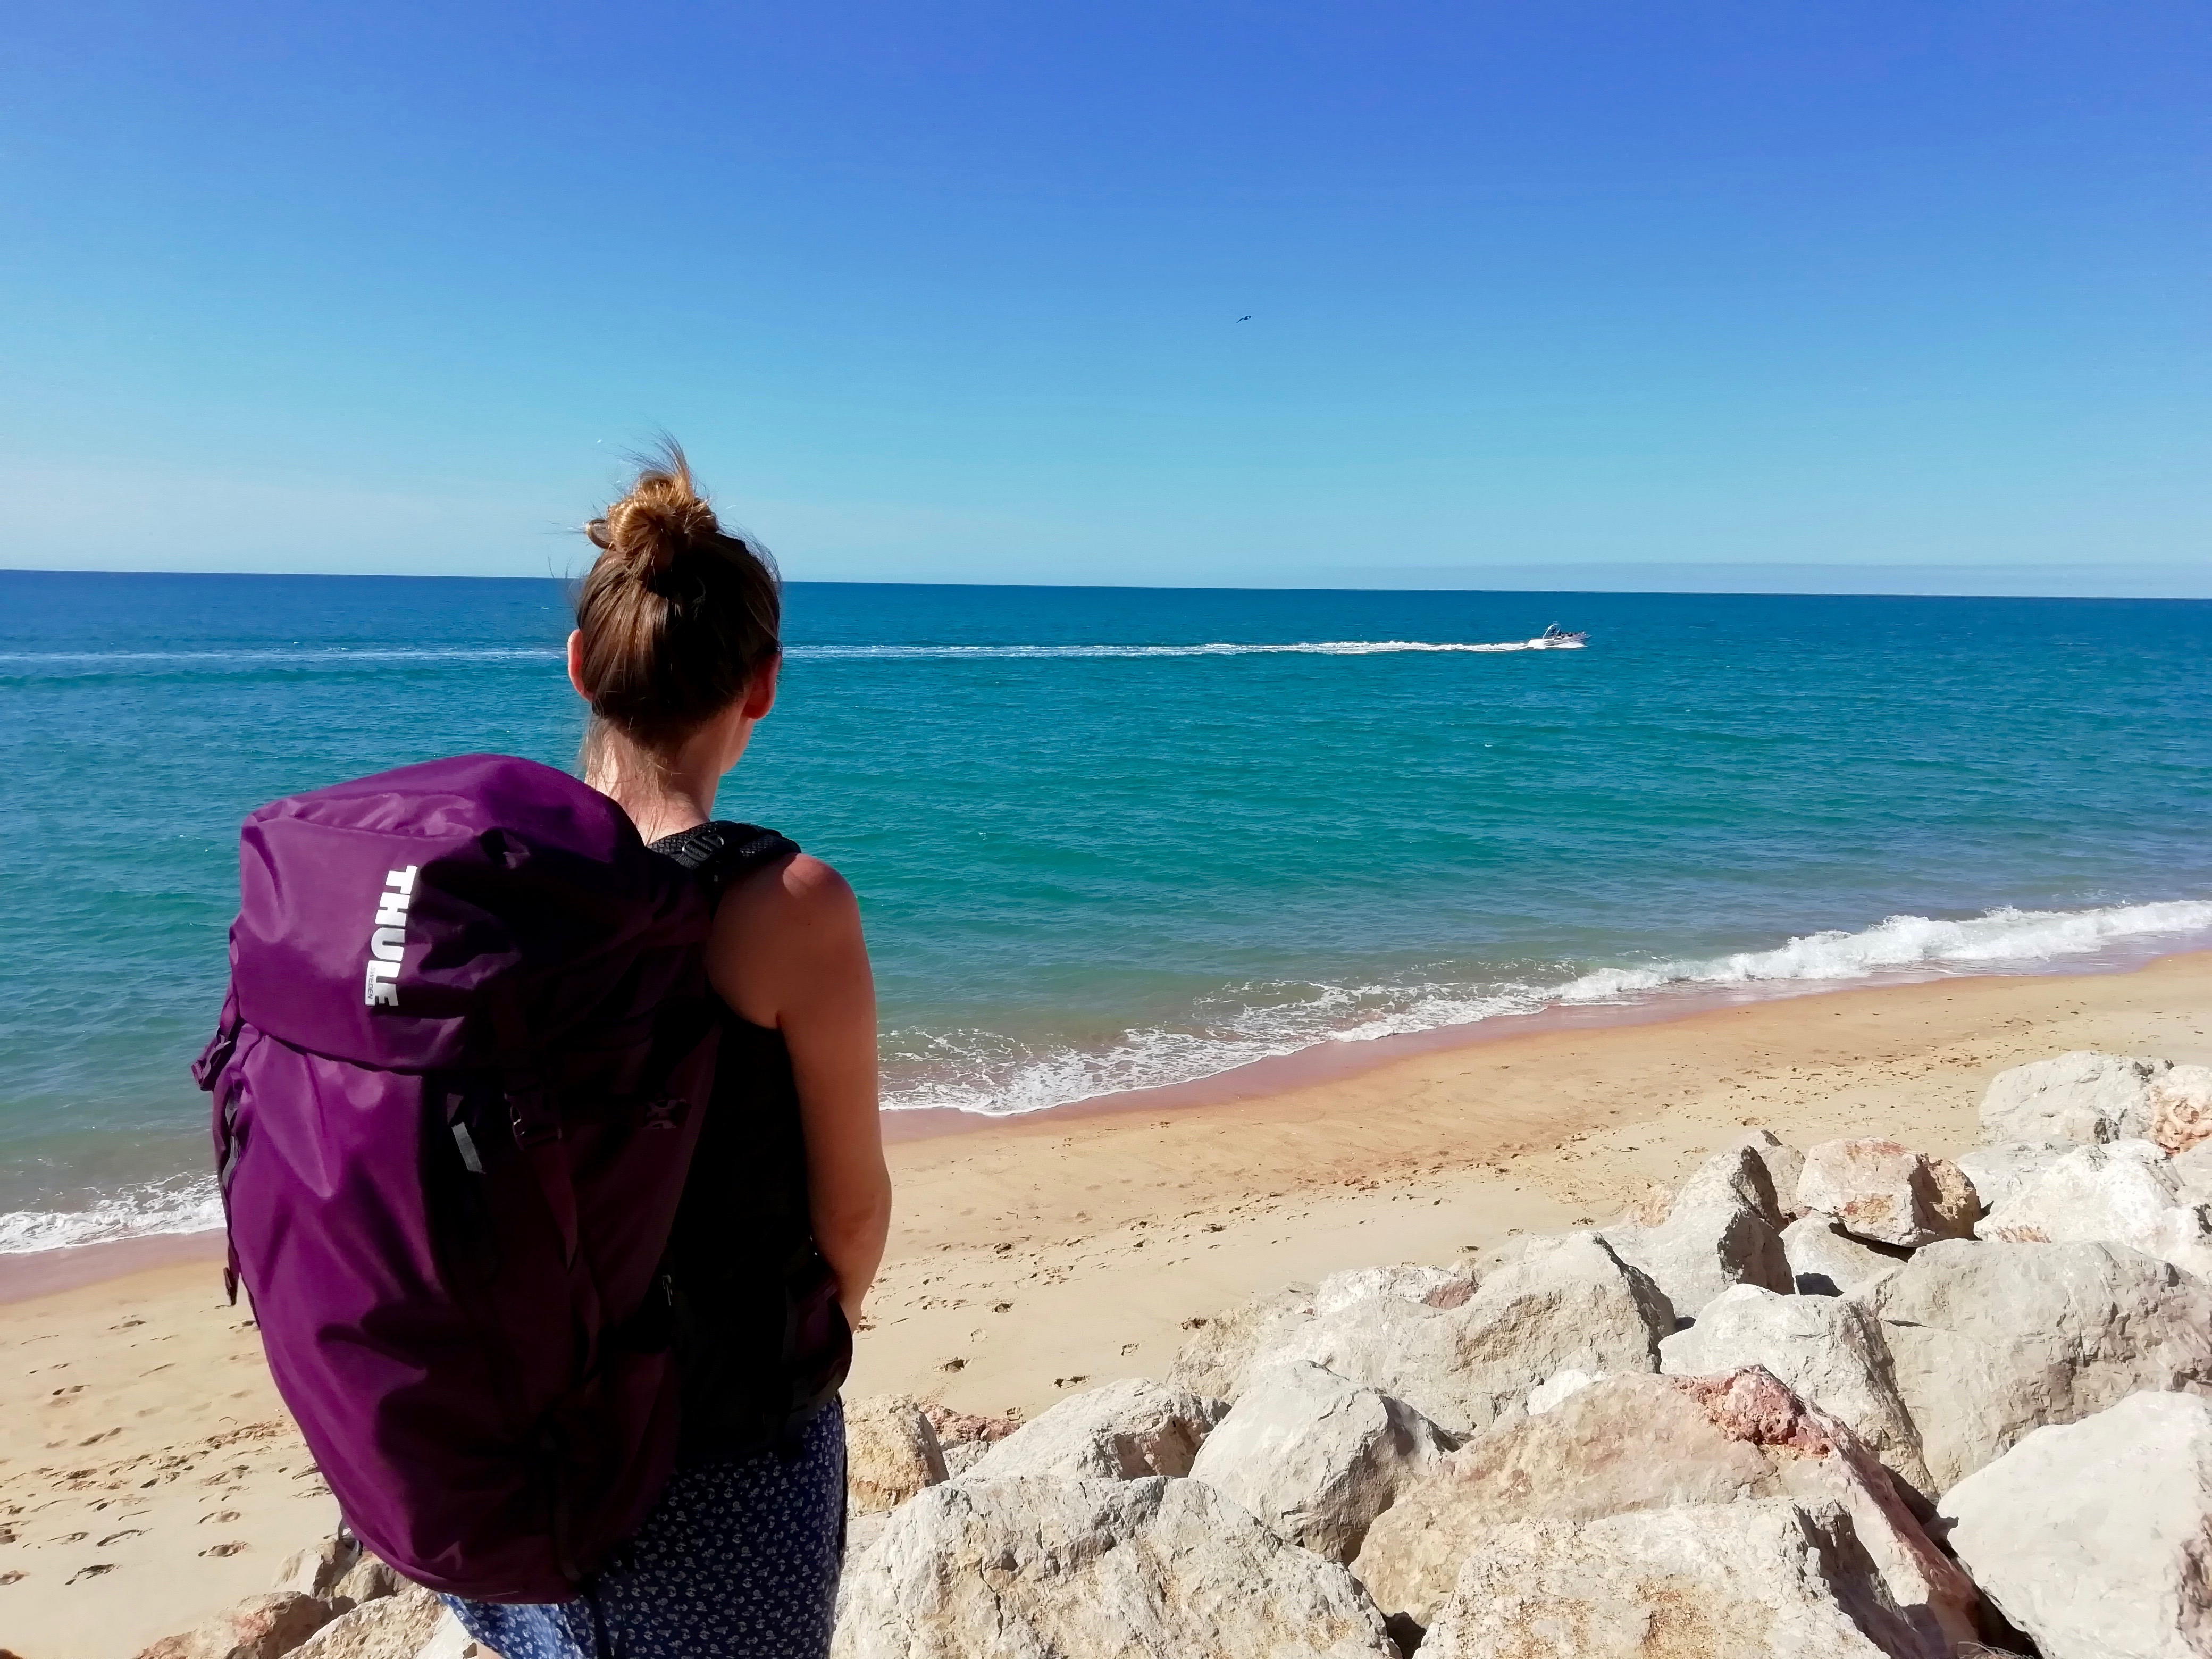 Amy carrying the 35L Thule AllTrail backpack by the sea